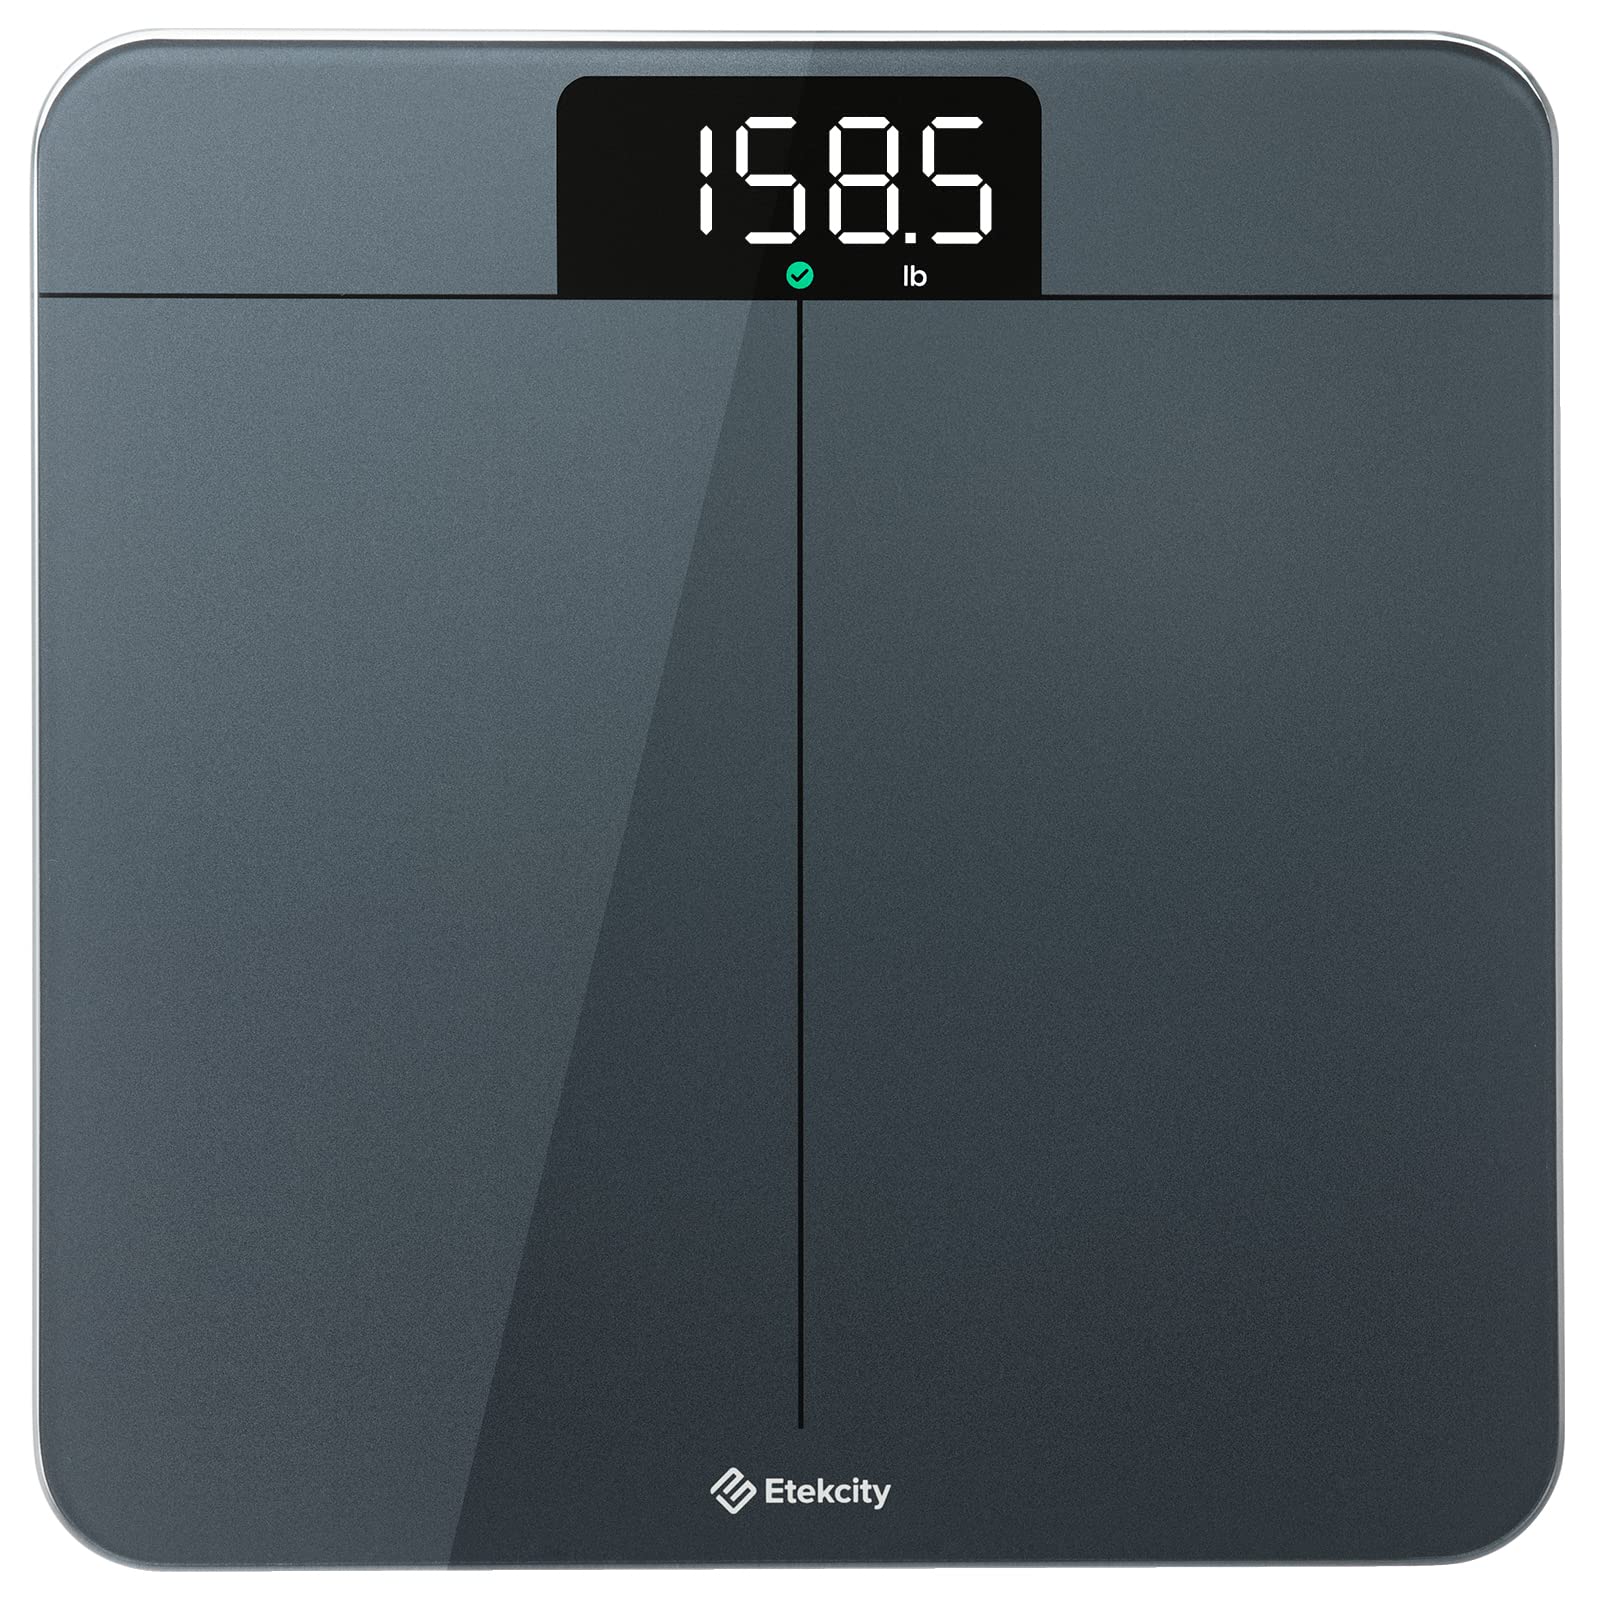 Etekcity Scale for Body Weight, Digital Bathroom Scales for People, Most Accurate to 0 05lb, Bright LED Display Large Clear Numbers, Upgraded Quality for the Elderly Safe Home Use, 400 lbs